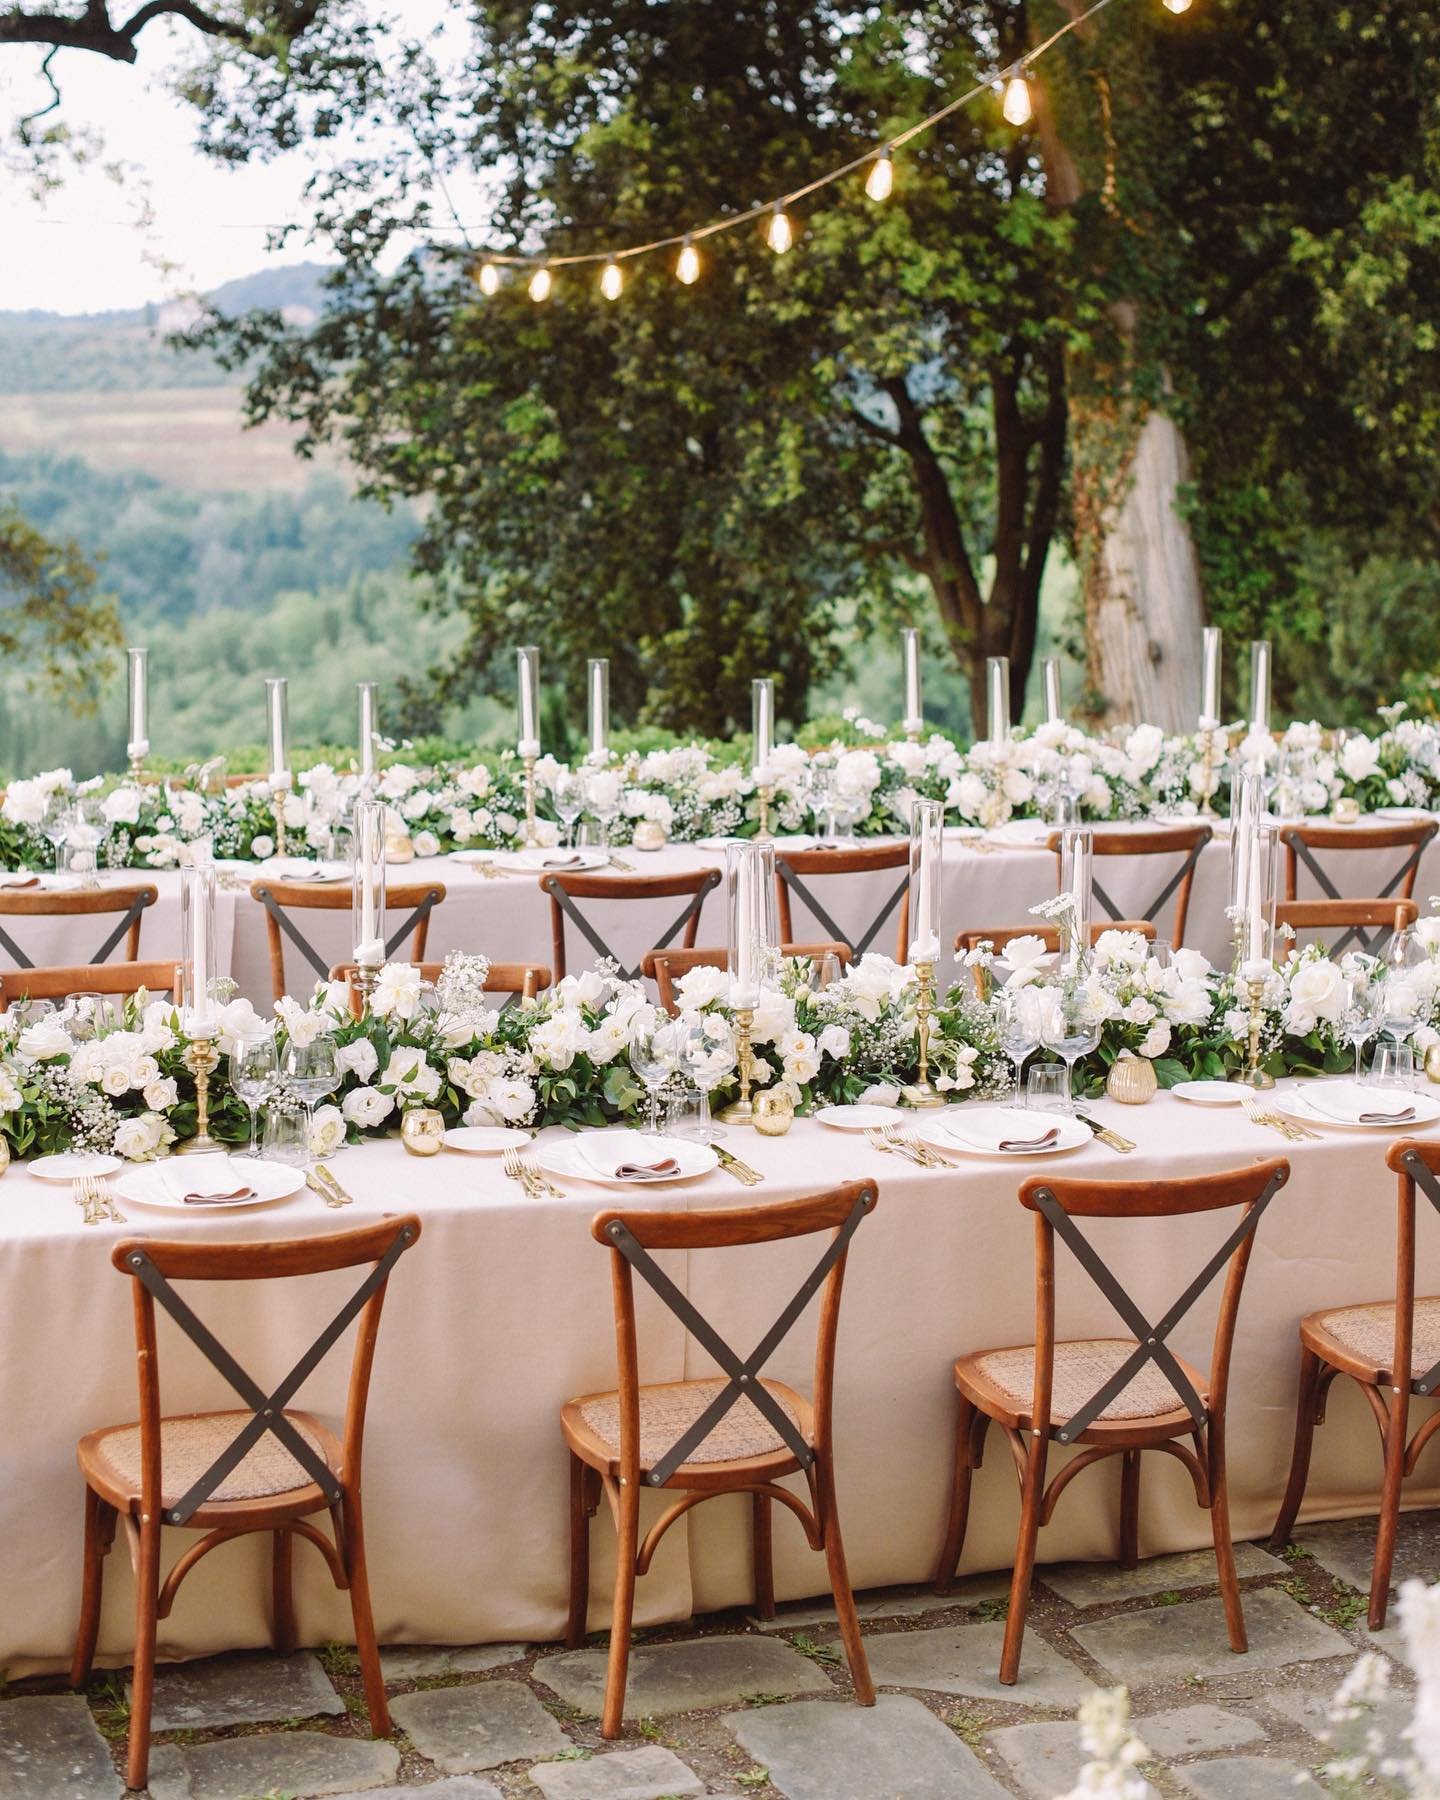 Step into this unique reception: two long imperial tables adorned with delicate white floral arrangements, golden candlesticks and precious tea lights under fairy lights. A true Tuscan dream! 

Wp: @paolocicognani_weddingsitaly 
Venue: @tenutasticcia